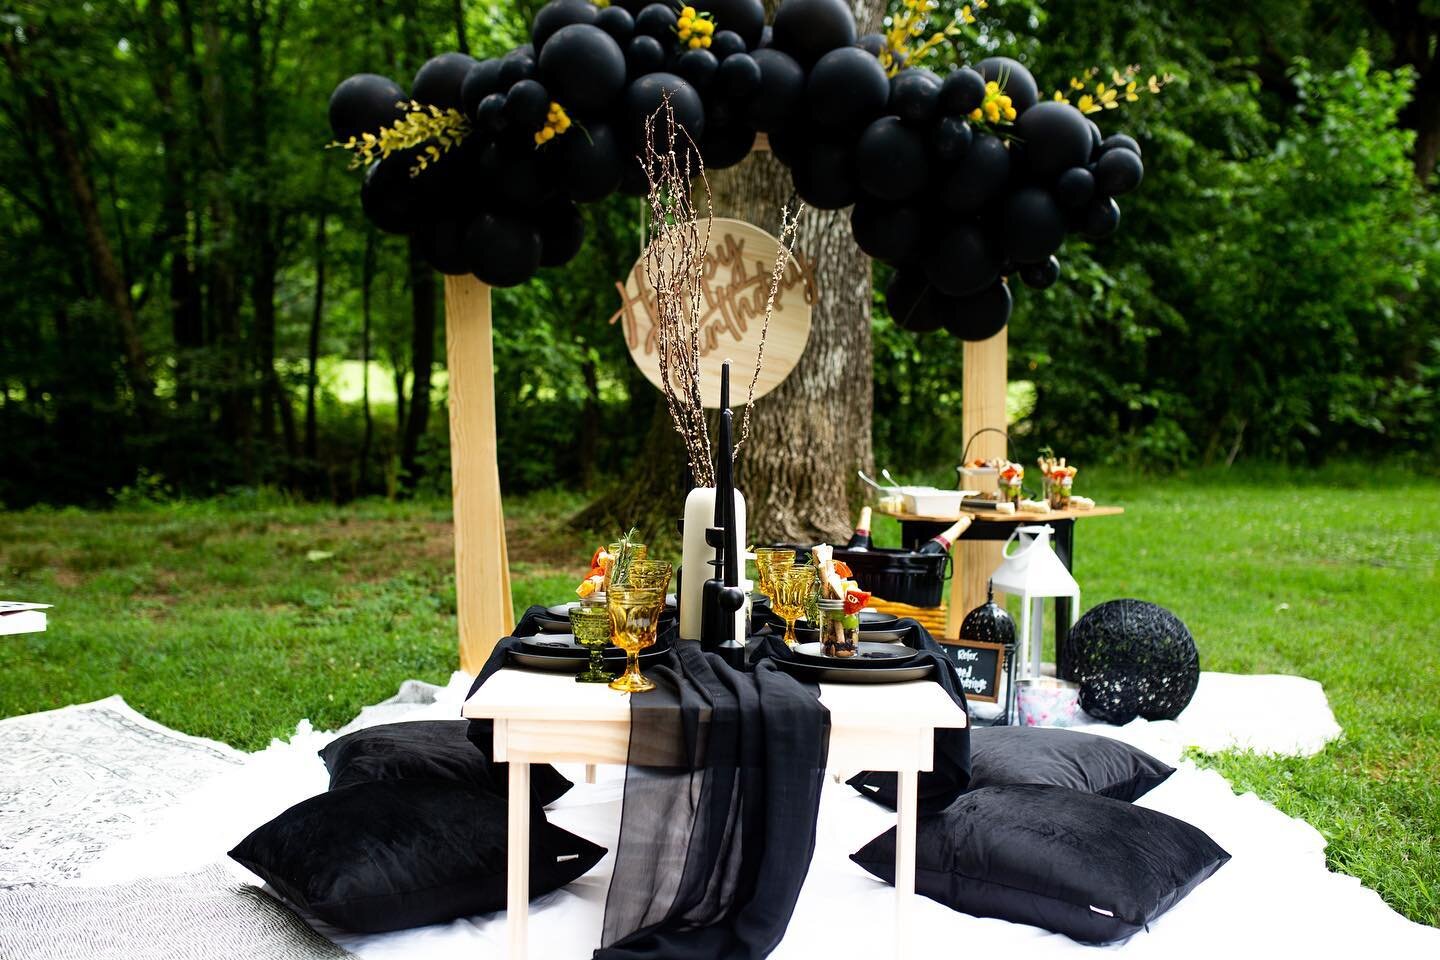 Let&rsquo;s get into the details!  Would you book this package?? Comment &ldquo;YES&rdquo; below!! 📸: @sierracollinsphotography
&bull;
&bull;

#picnicdate #eventdesign #datenight #blacklove #picnicsetup #coupleslove #smallbusinesslife #smallbusiness